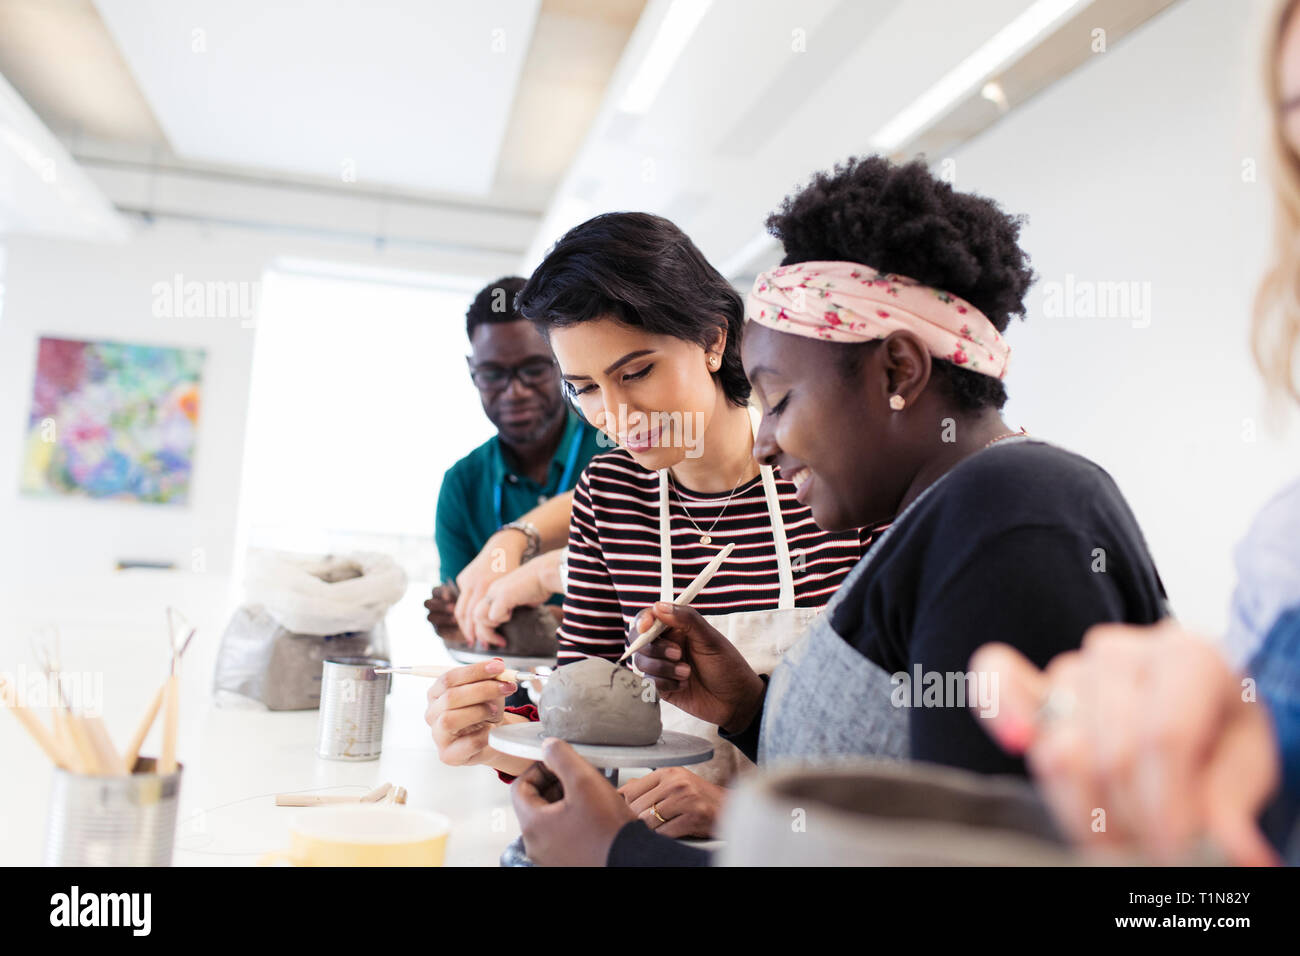 Woman shaping clay in art class Stock Photo